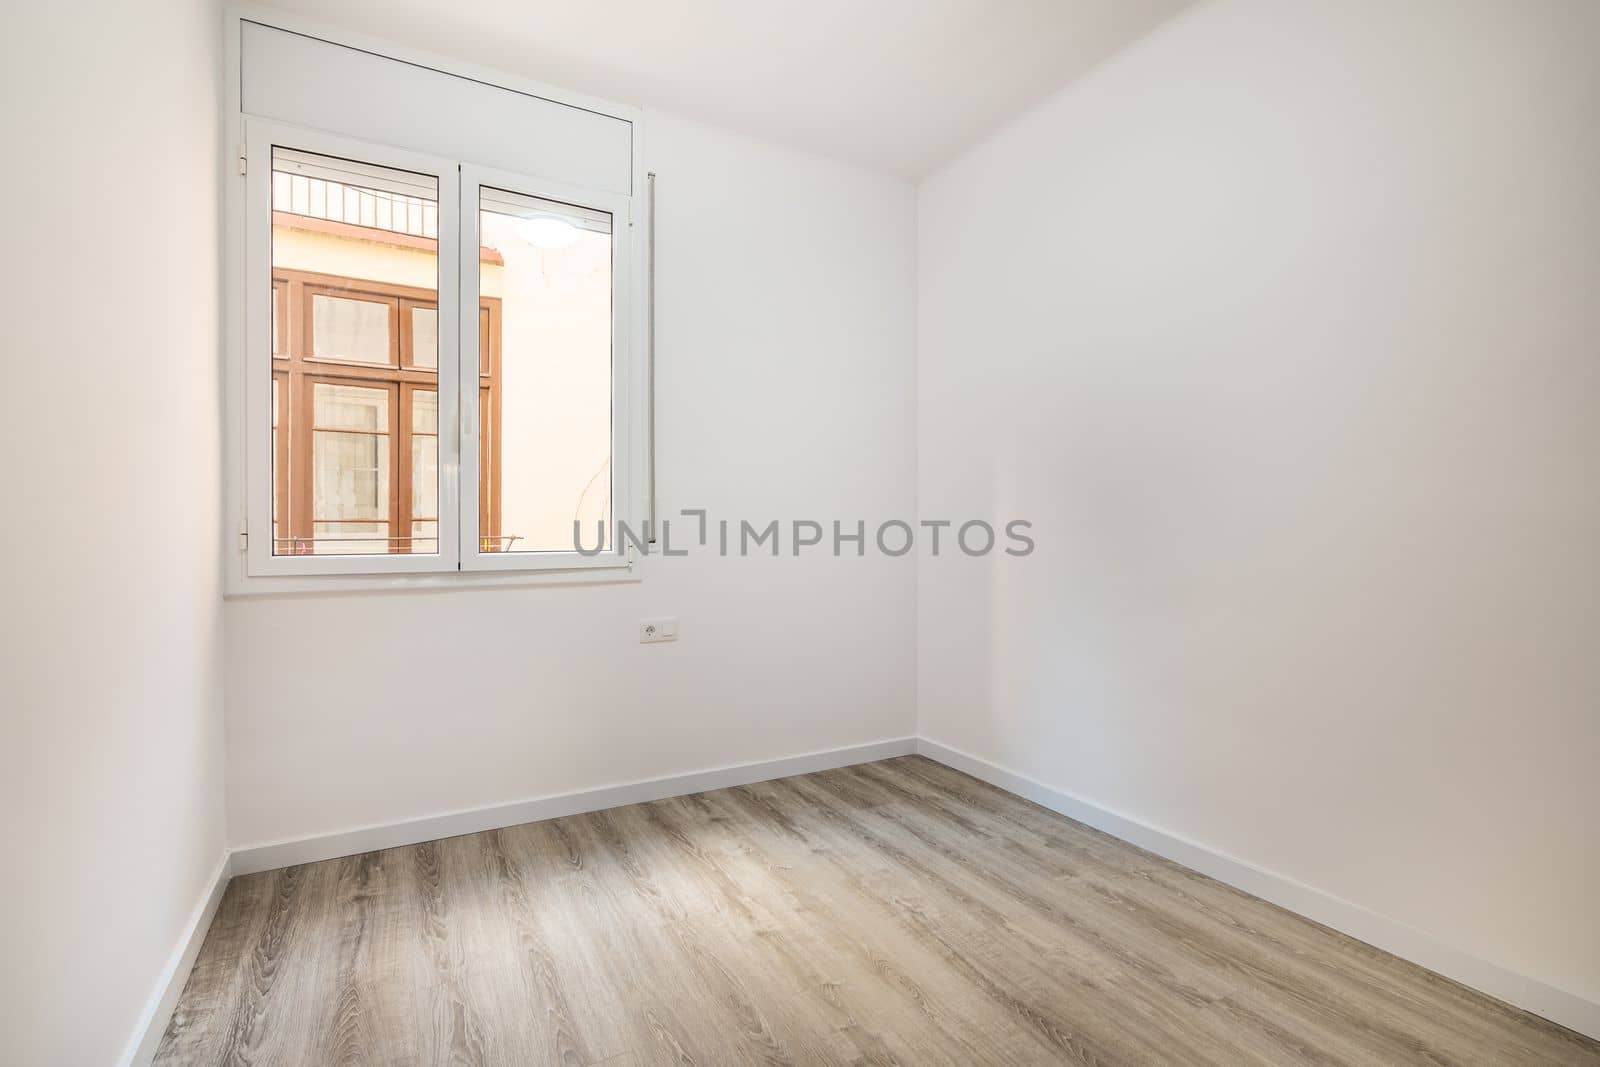 An empty bright room with a window in which the windows of a nearby house are visible. External metal shutters are built into the window to darken the room during daylight hours. by apavlin